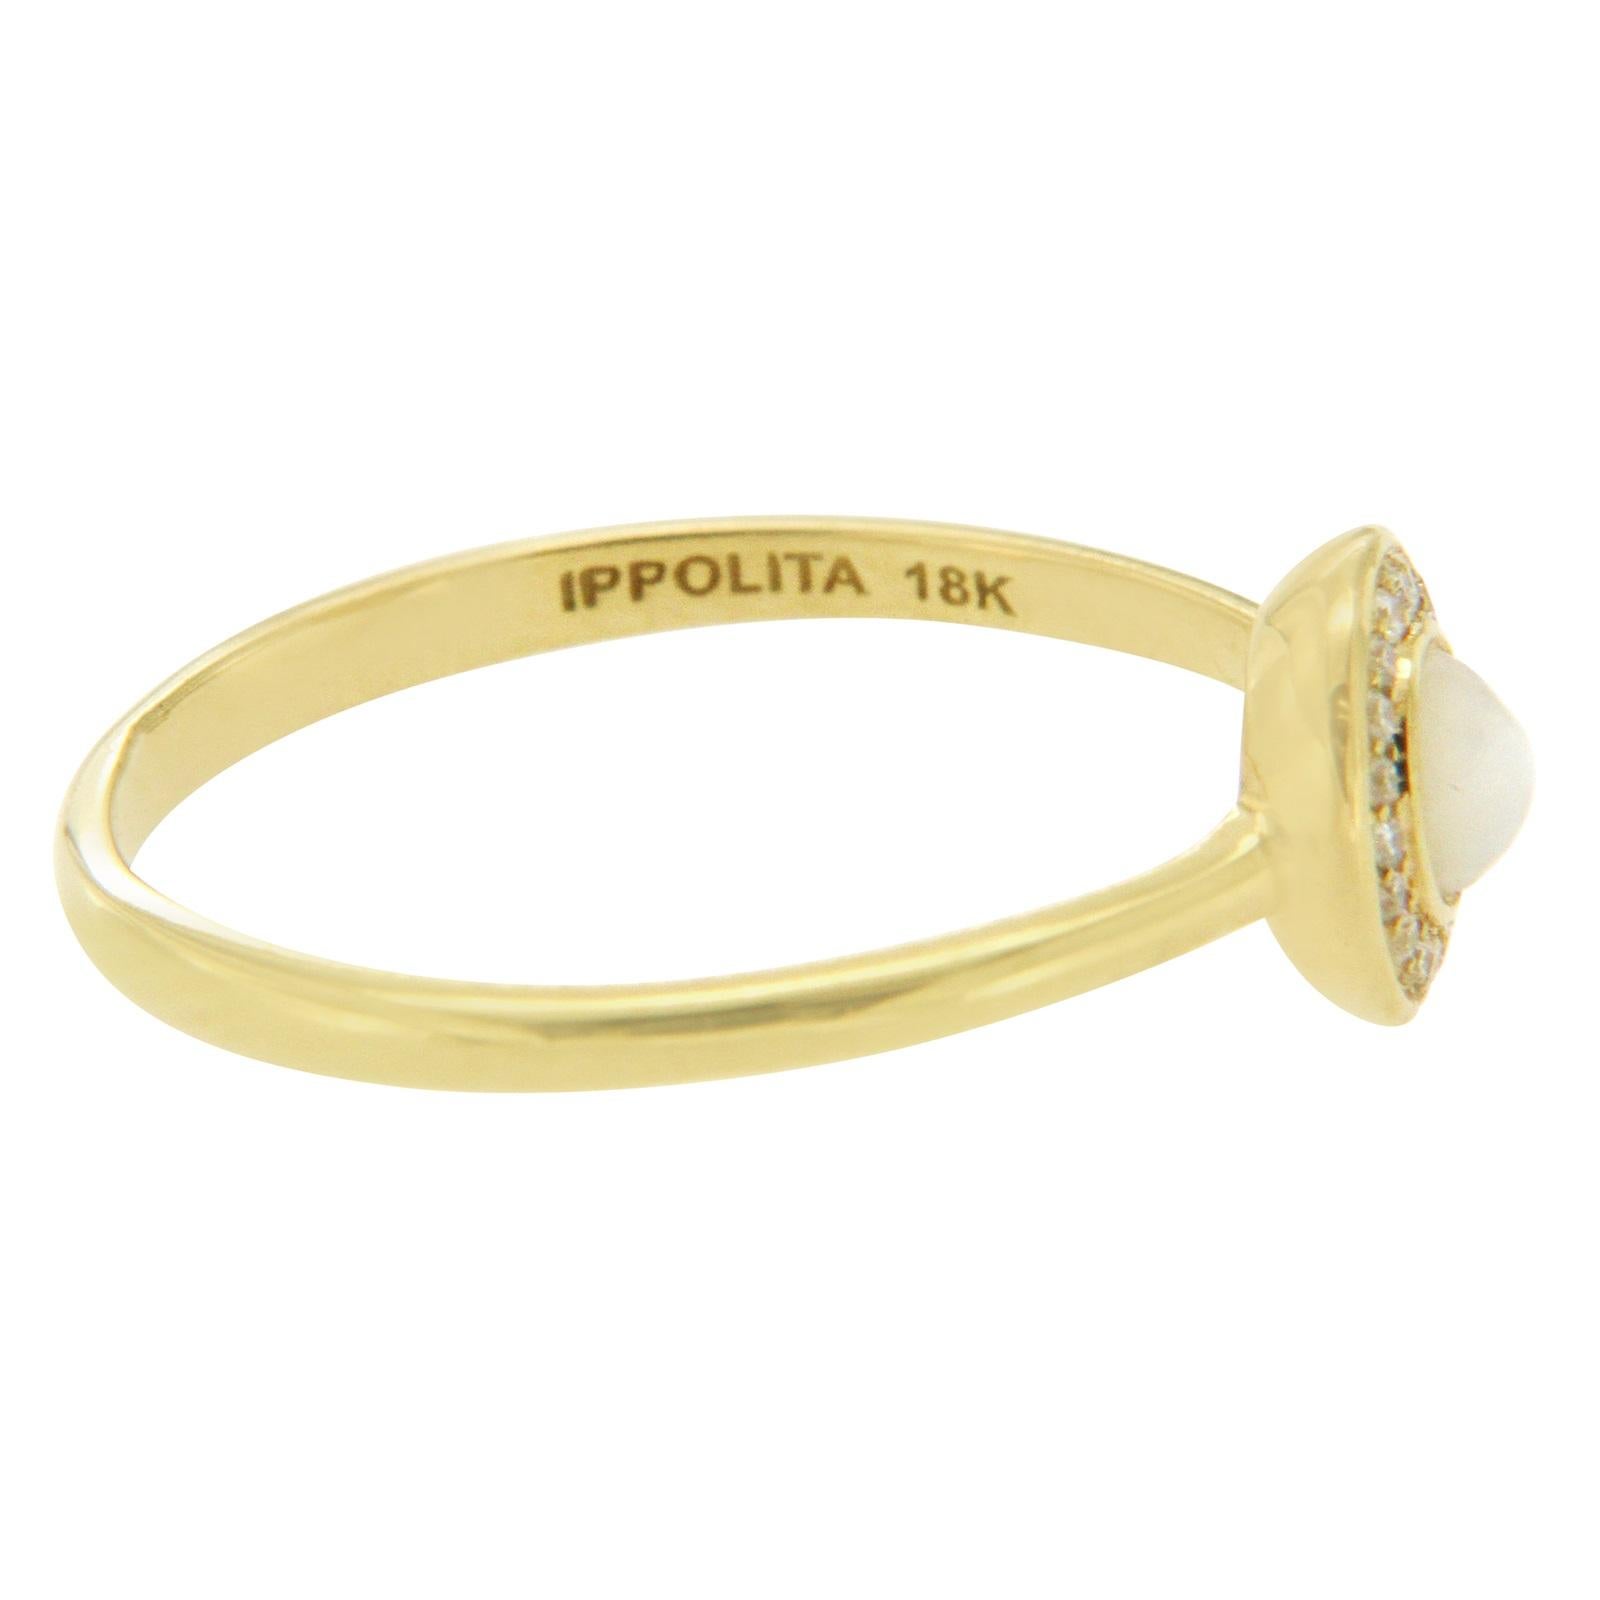 Type: Ring
Top: 7 mm
Band Width: 1.7 mm
Metal: Yellow Gold
Metal Purity: 18K.
Hallmarks: Ippolita 18K
Total Weight: 2.2 Grams
Stone Type: Diamonds & Mother of Pearl
Condition: New
Stock Number: U511
Retail Price:$895